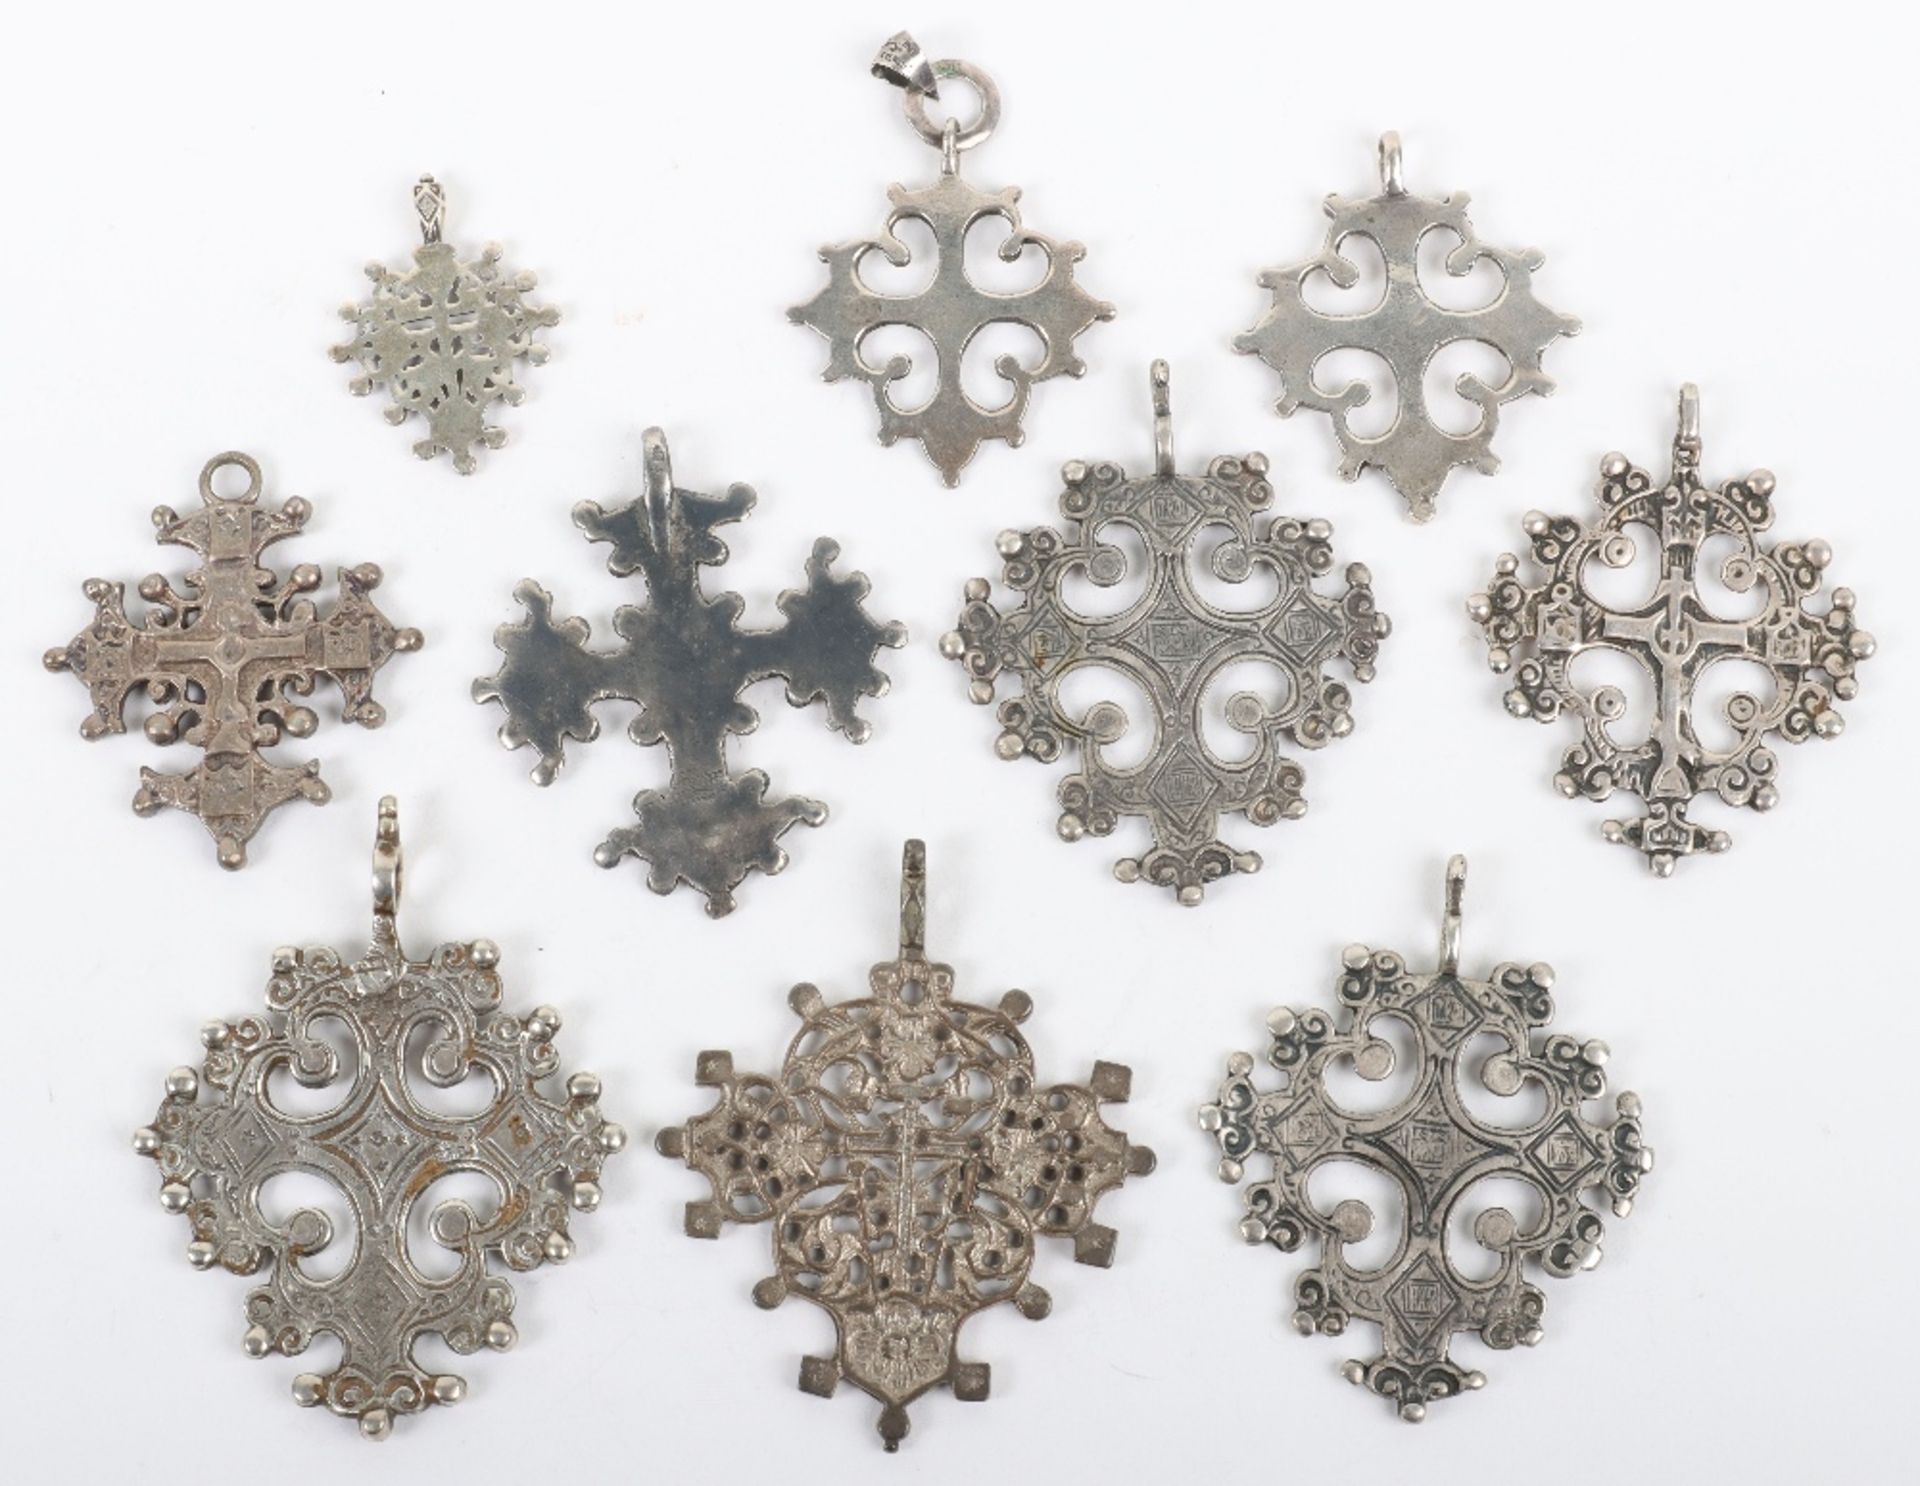 Ten Russian silver and other pendant crosses - Image 2 of 2